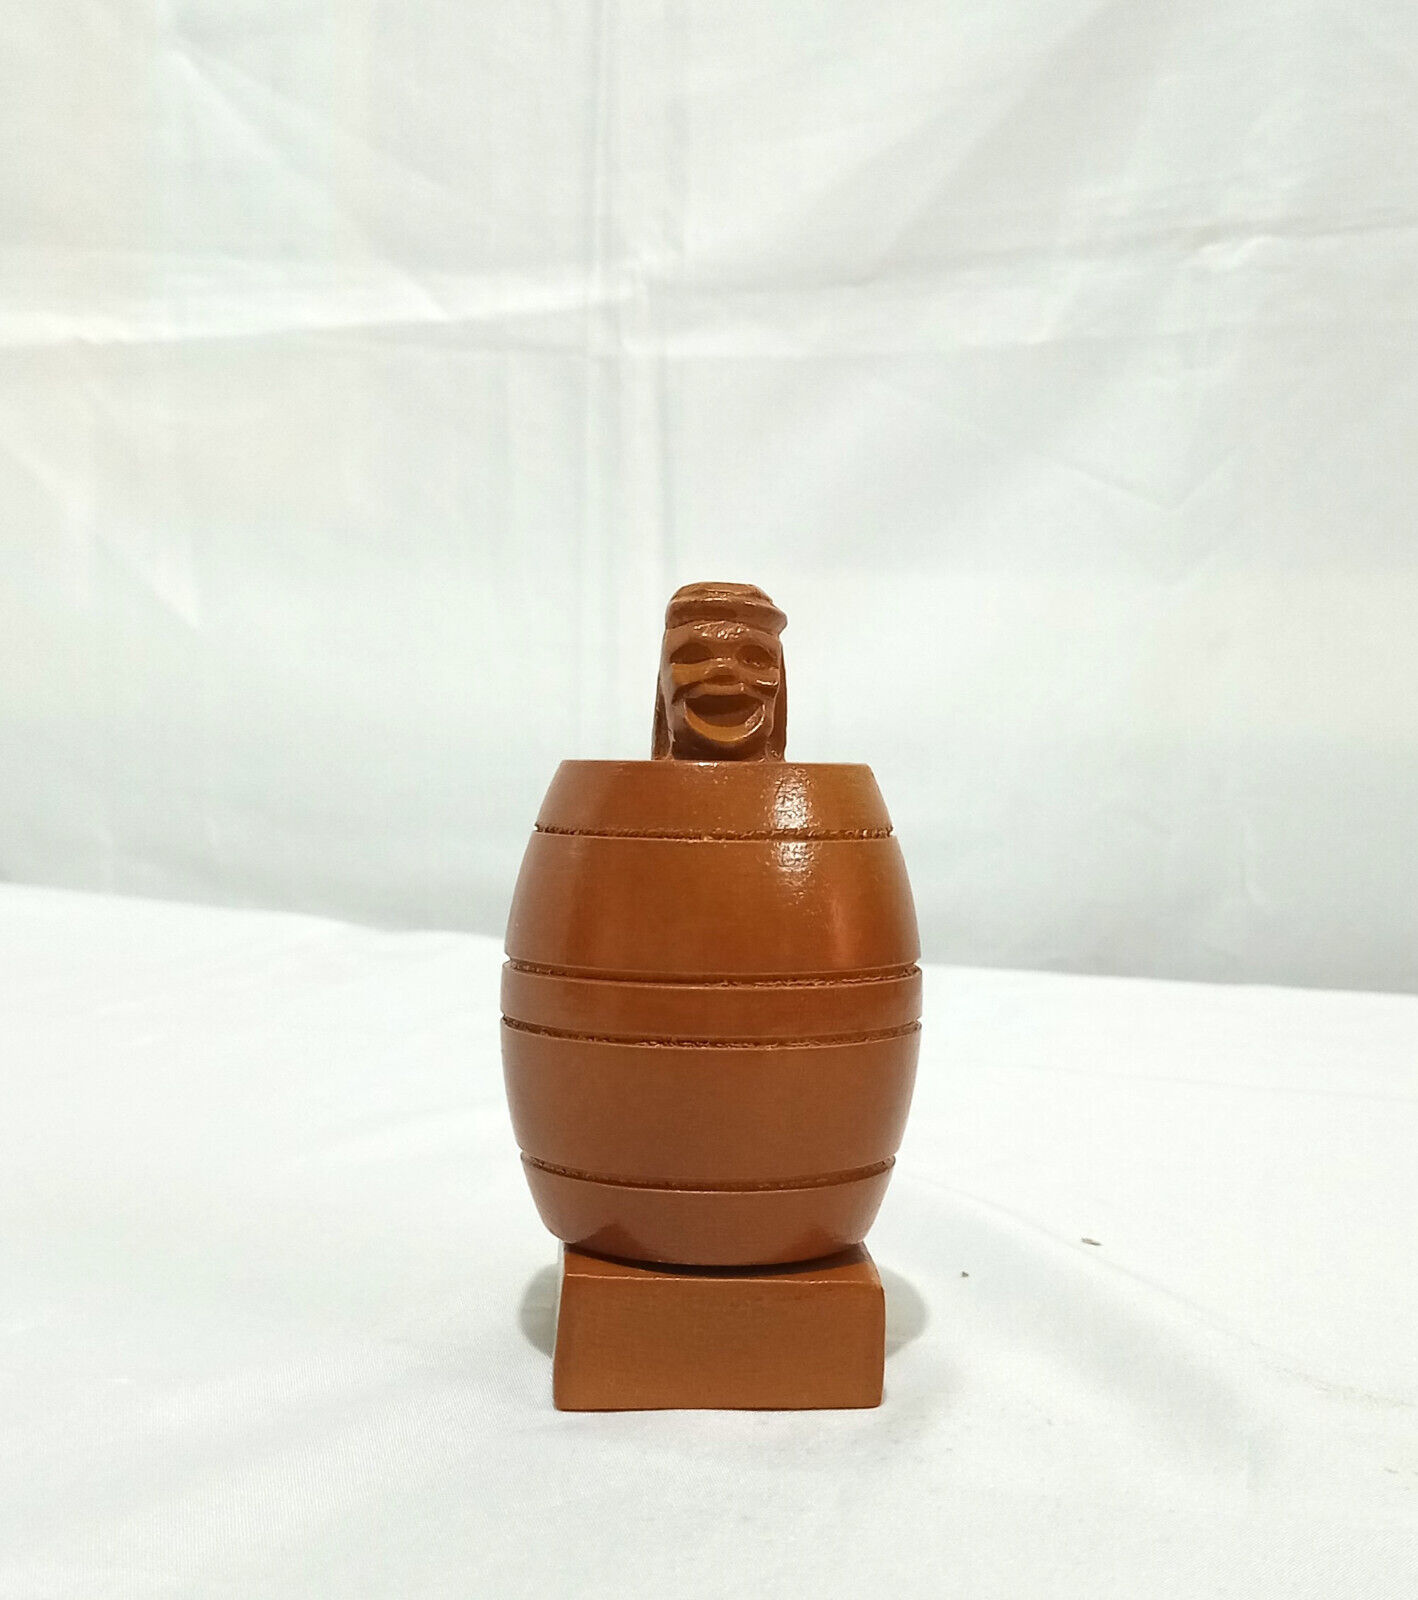 Small Wooden Barrel Man Figurine Made in Philippines, Funny Souvenir Gift Ideas